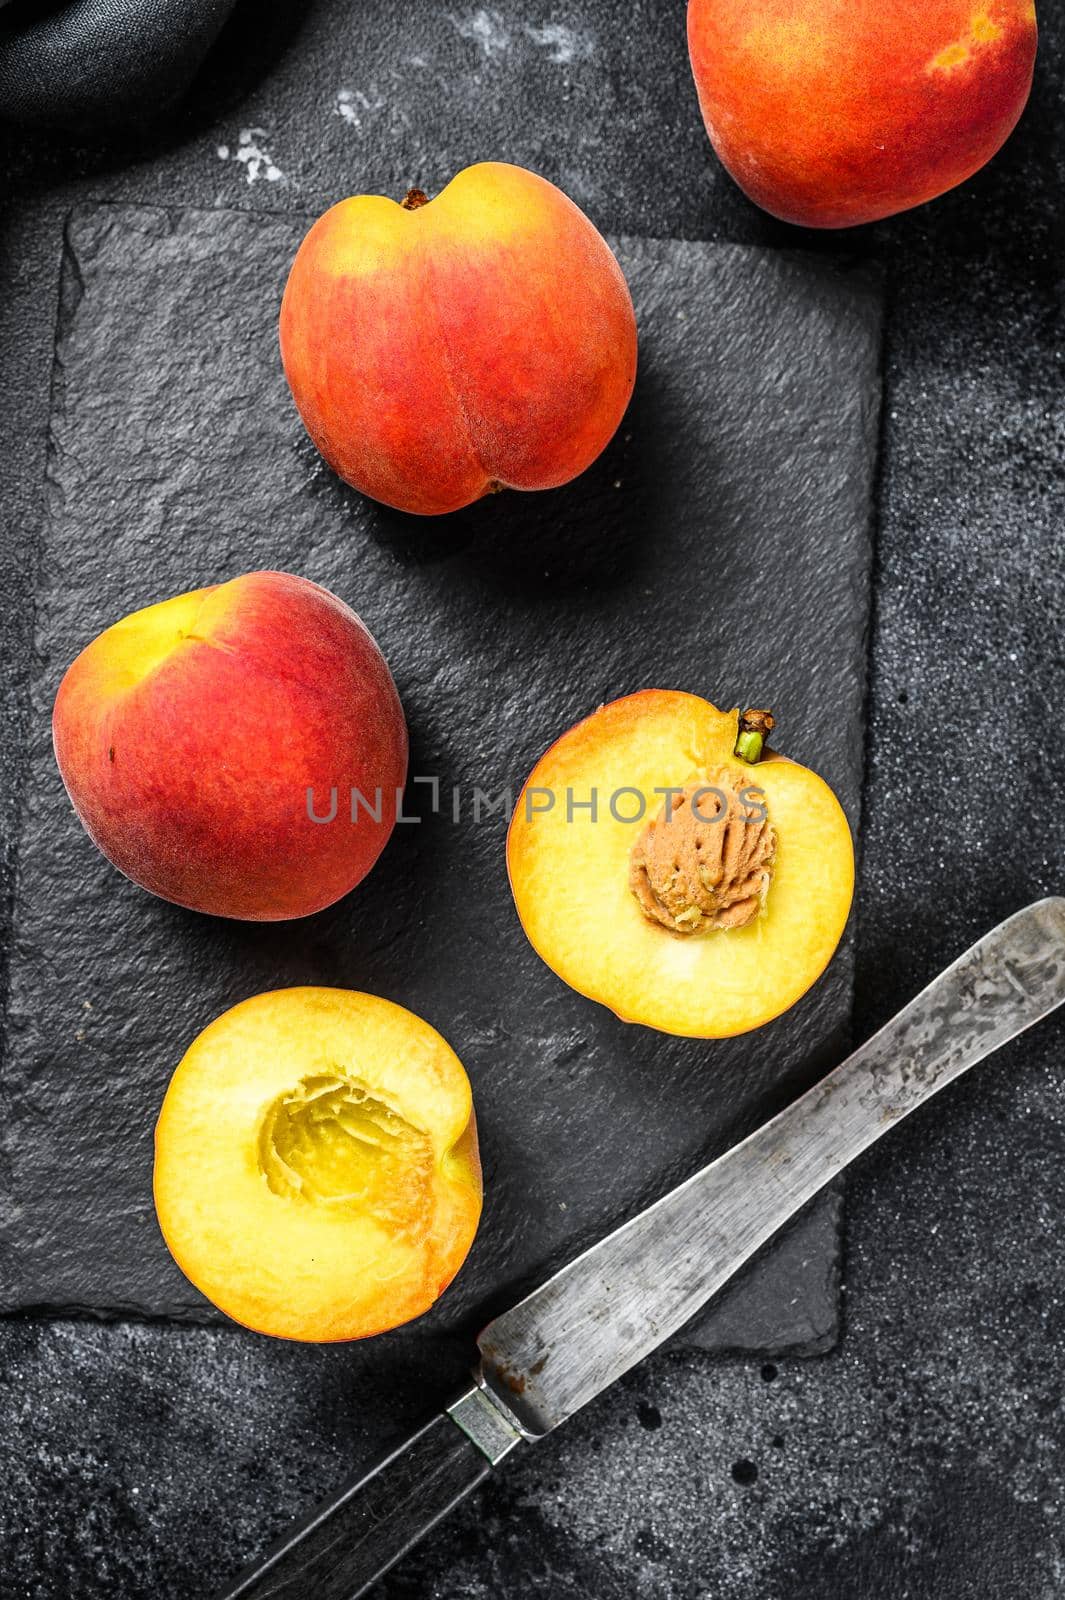 Organic Peaches fruit on a black stone Board. Black background. Top view.